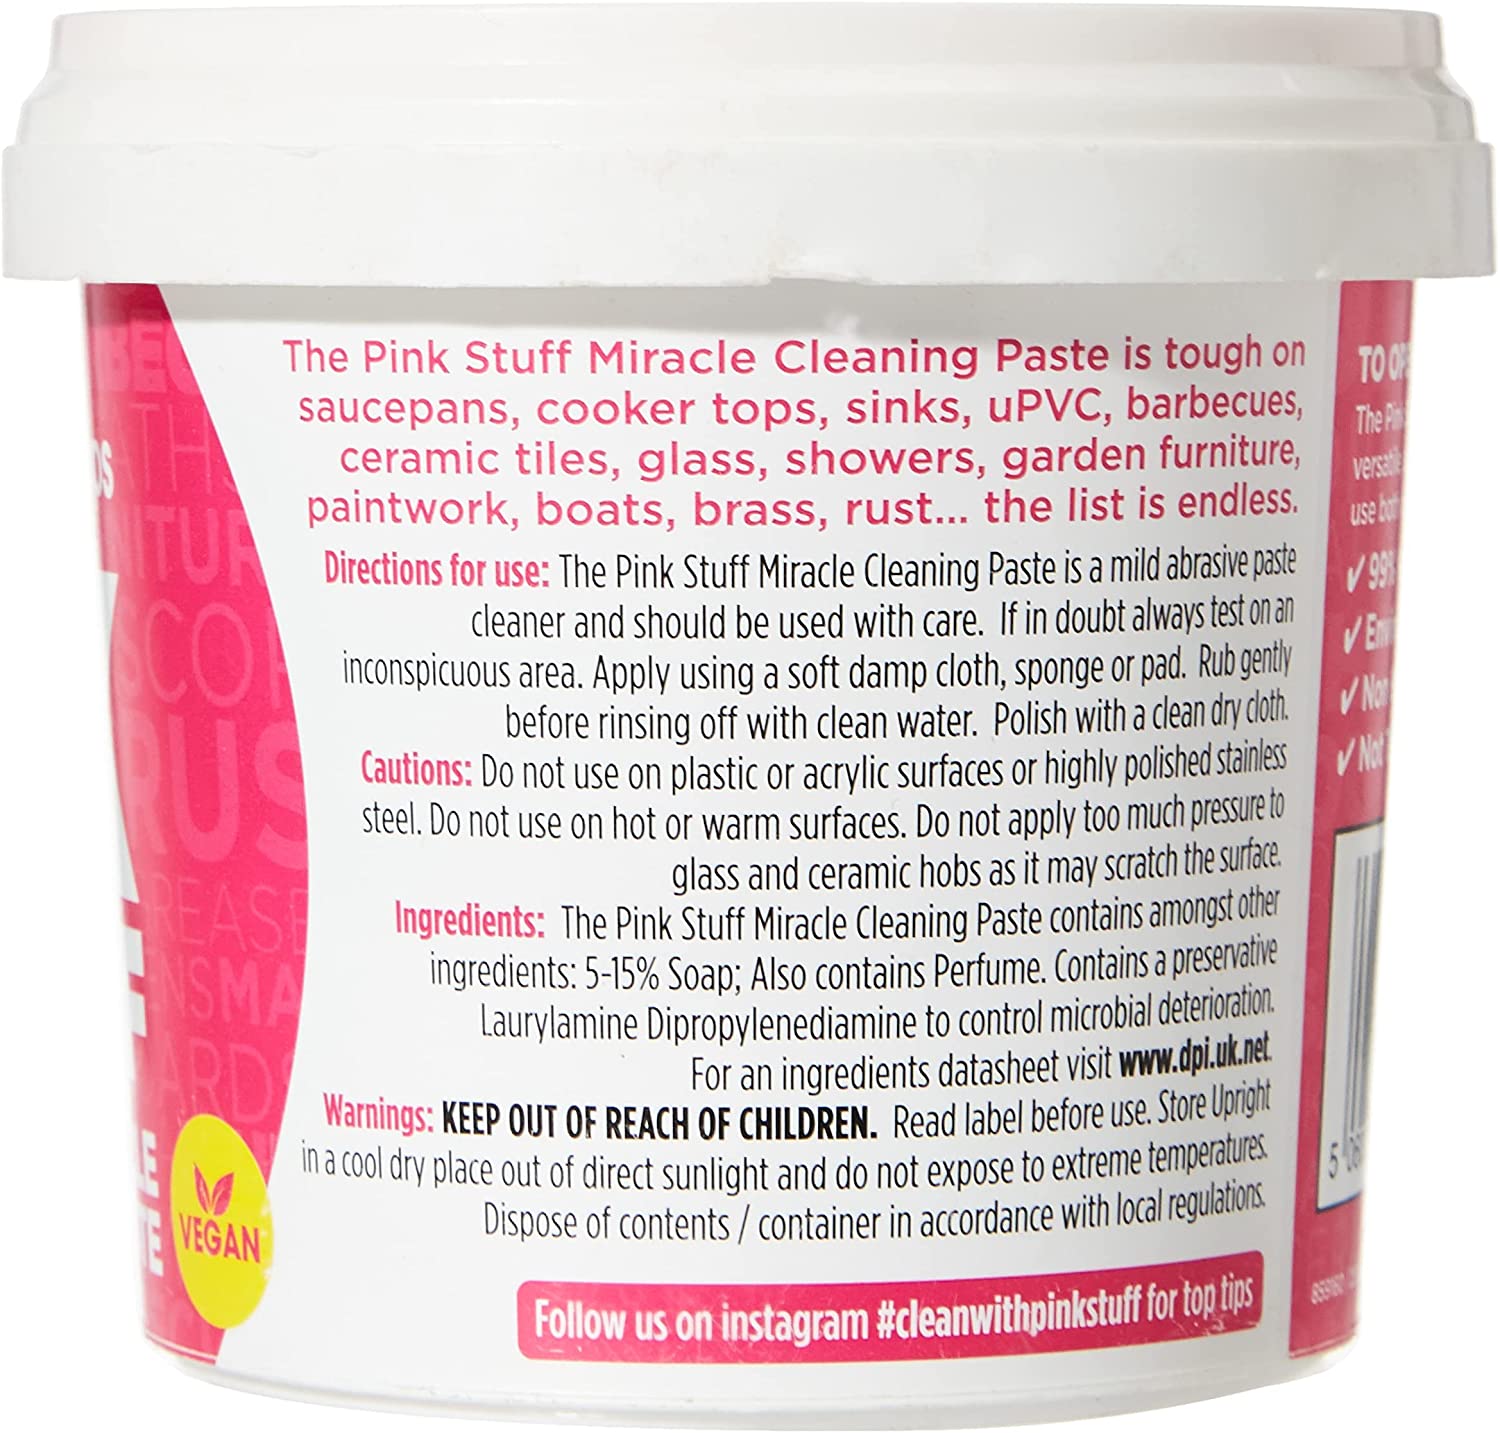 Stardrops + Pink Stuff Cleaning Paste 500g